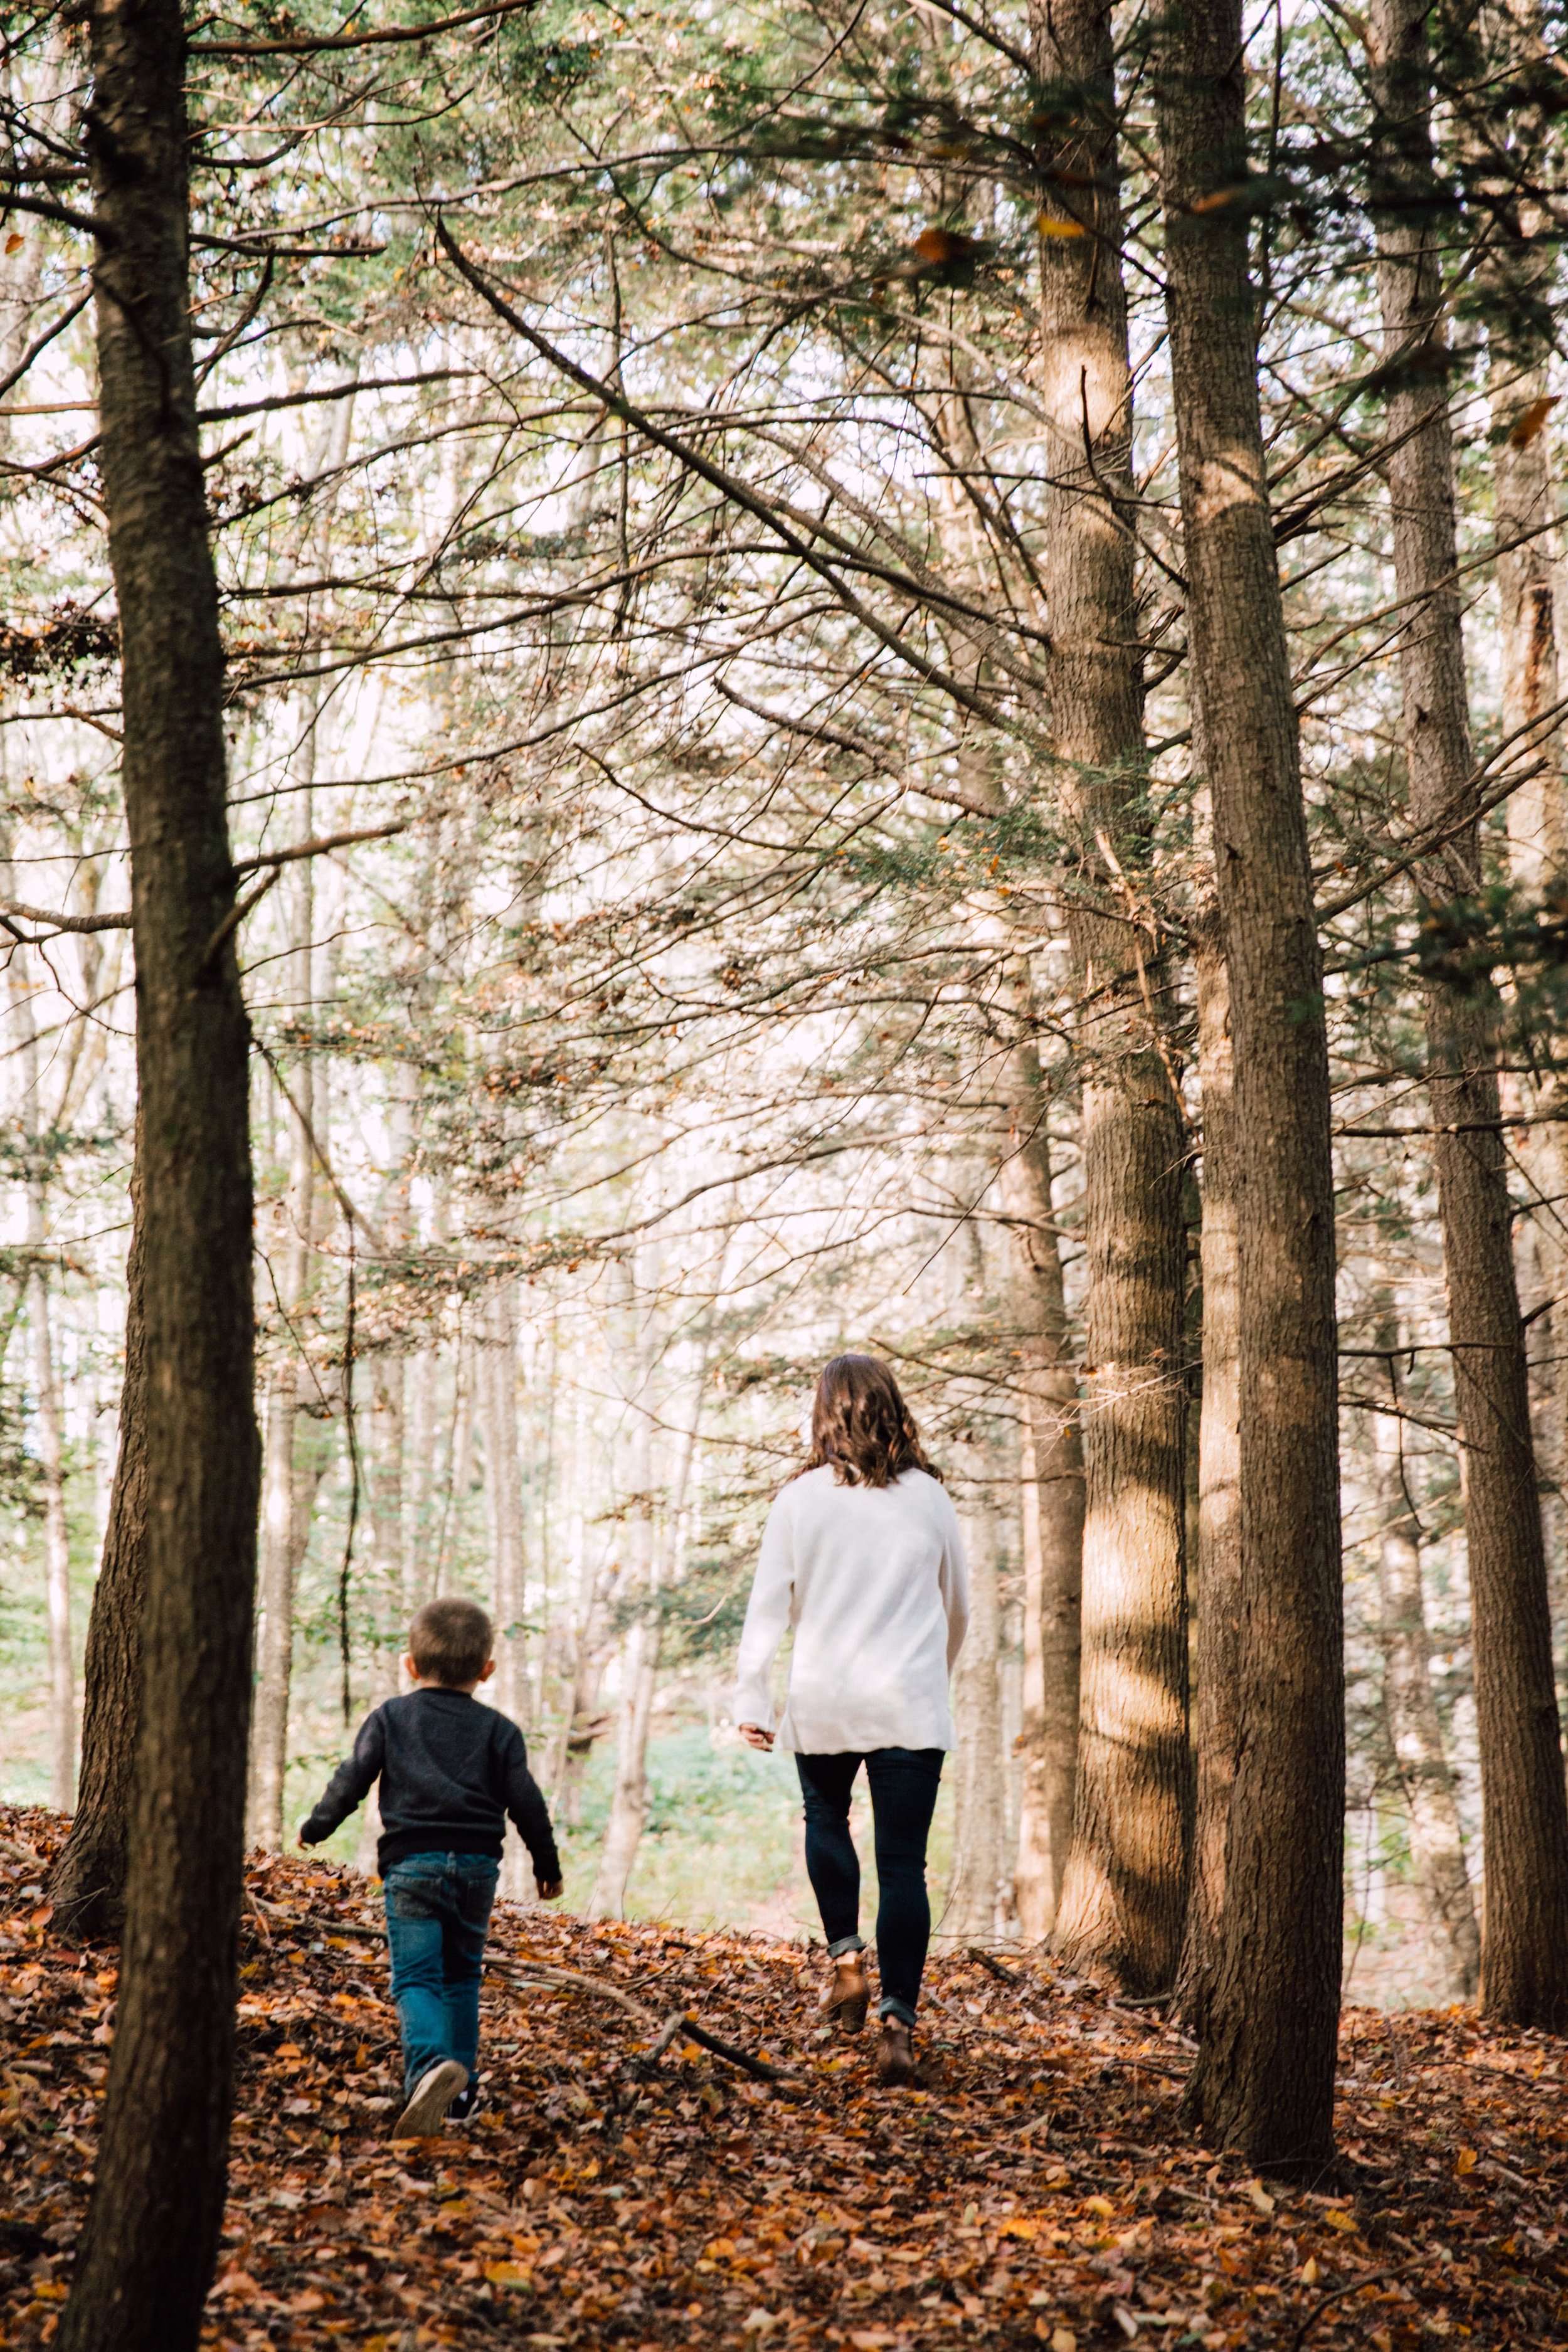  megan walks through a wooded area with her son in tow during their backyard photoshoot 